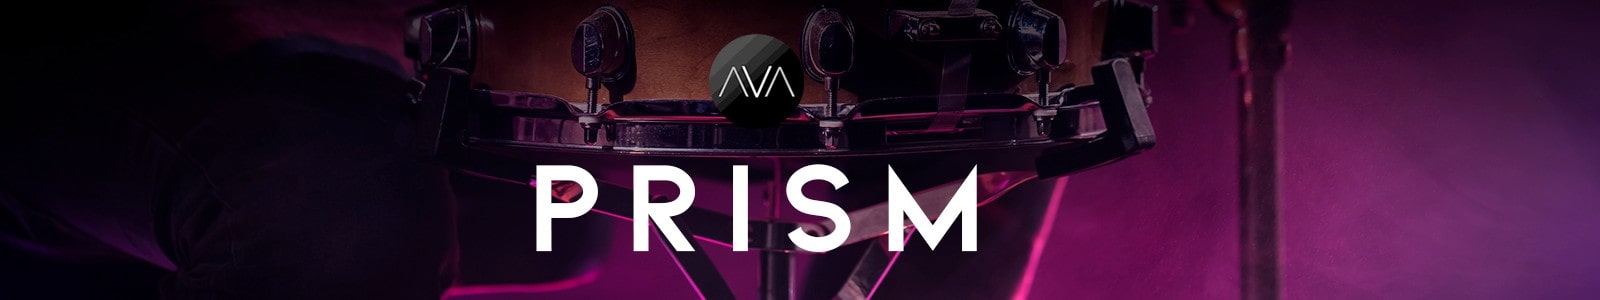 PRISM | Modern Pop Drums by AVA Music Group